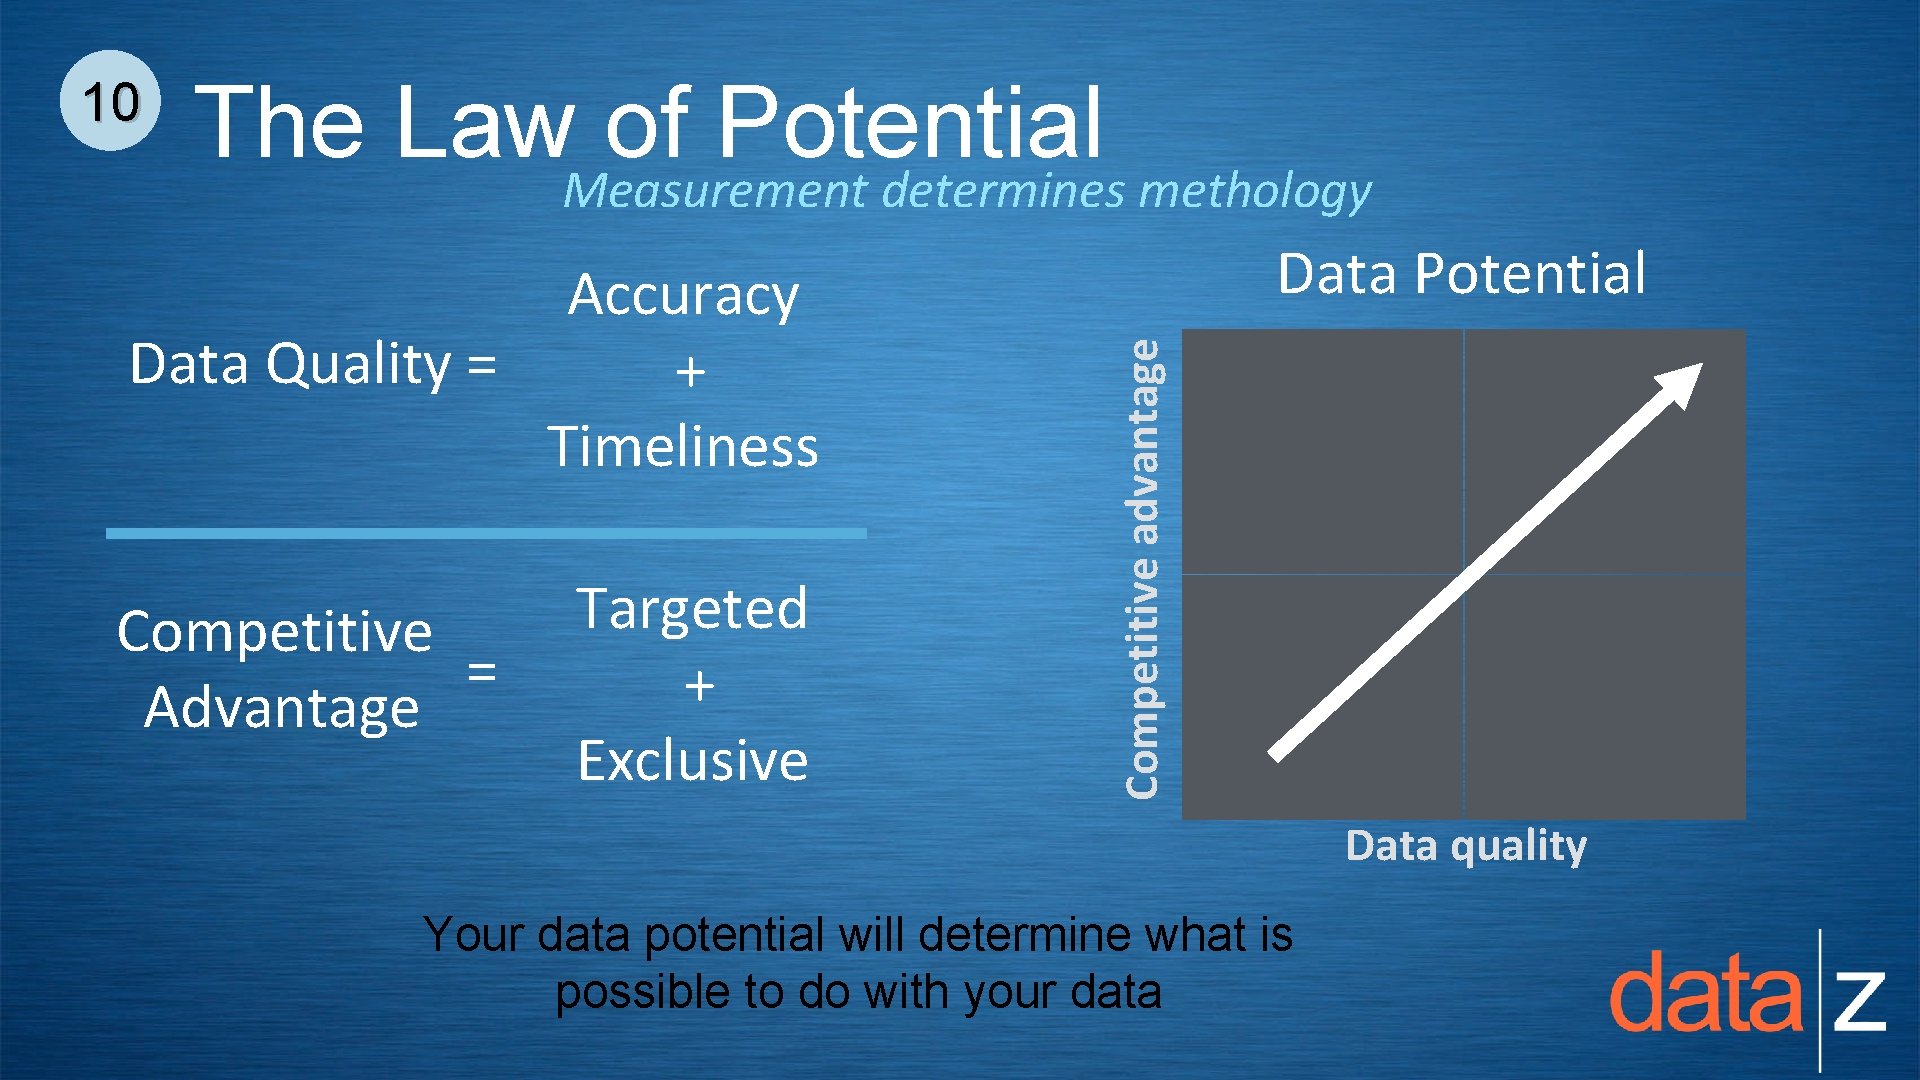 The Law. Measurement of Potential determines methology Accuracy Data Quality = + Timeliness Competitive